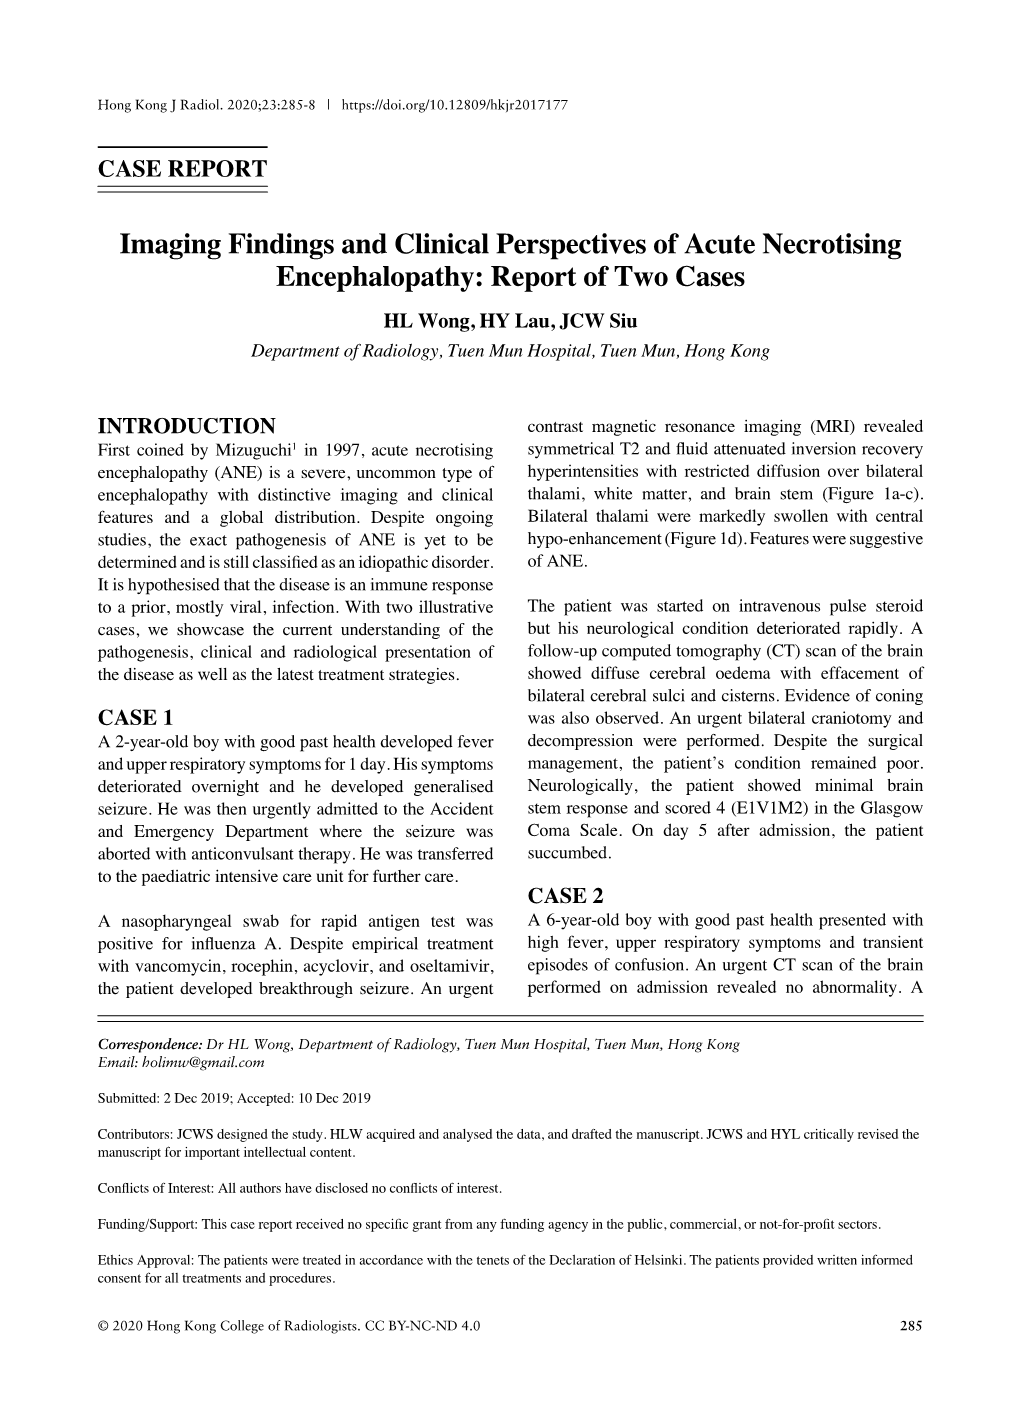 Imaging Findings and Clinical Perspectives of Acute Necrotising